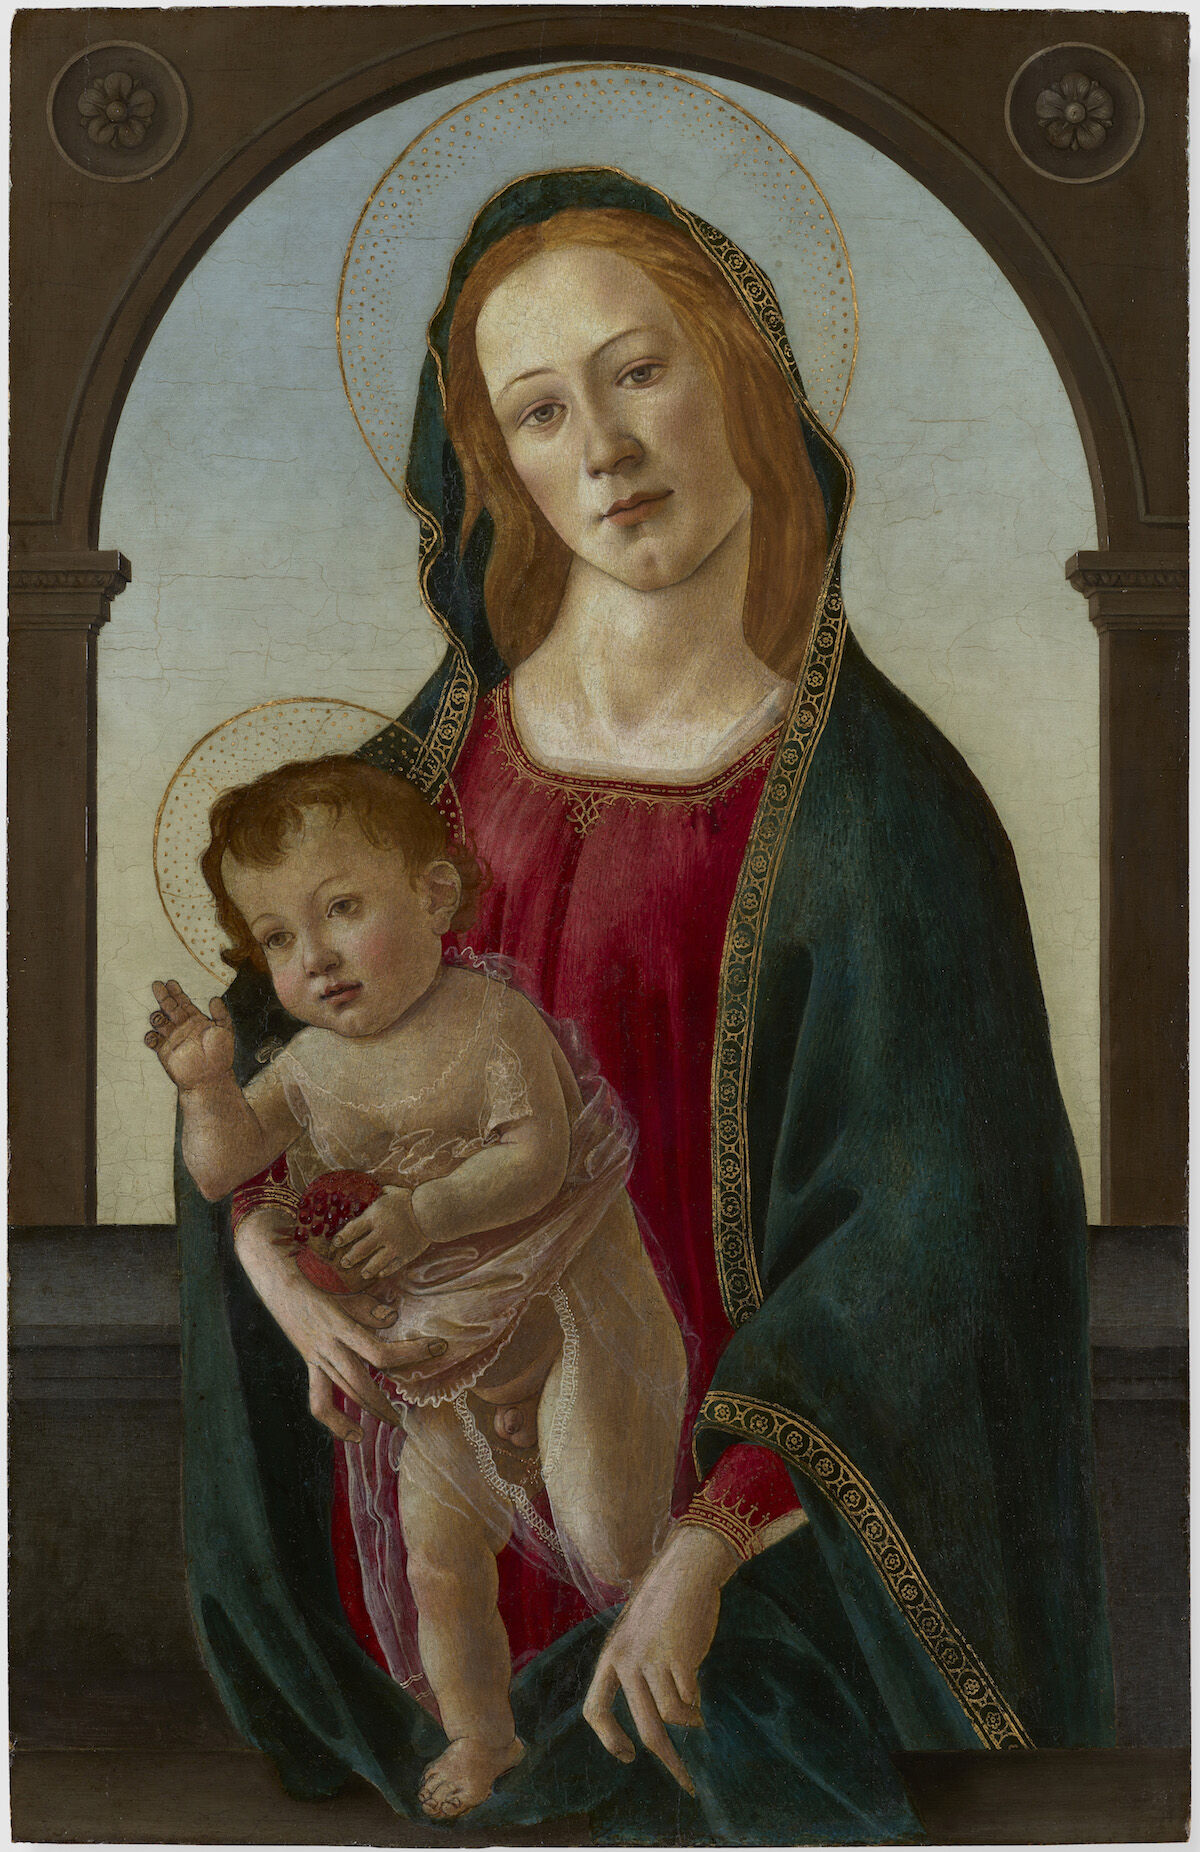 The Madonna and Child (1480s), a work now attributed in part to Botticelli. Courtesy National Museum Cardiff.